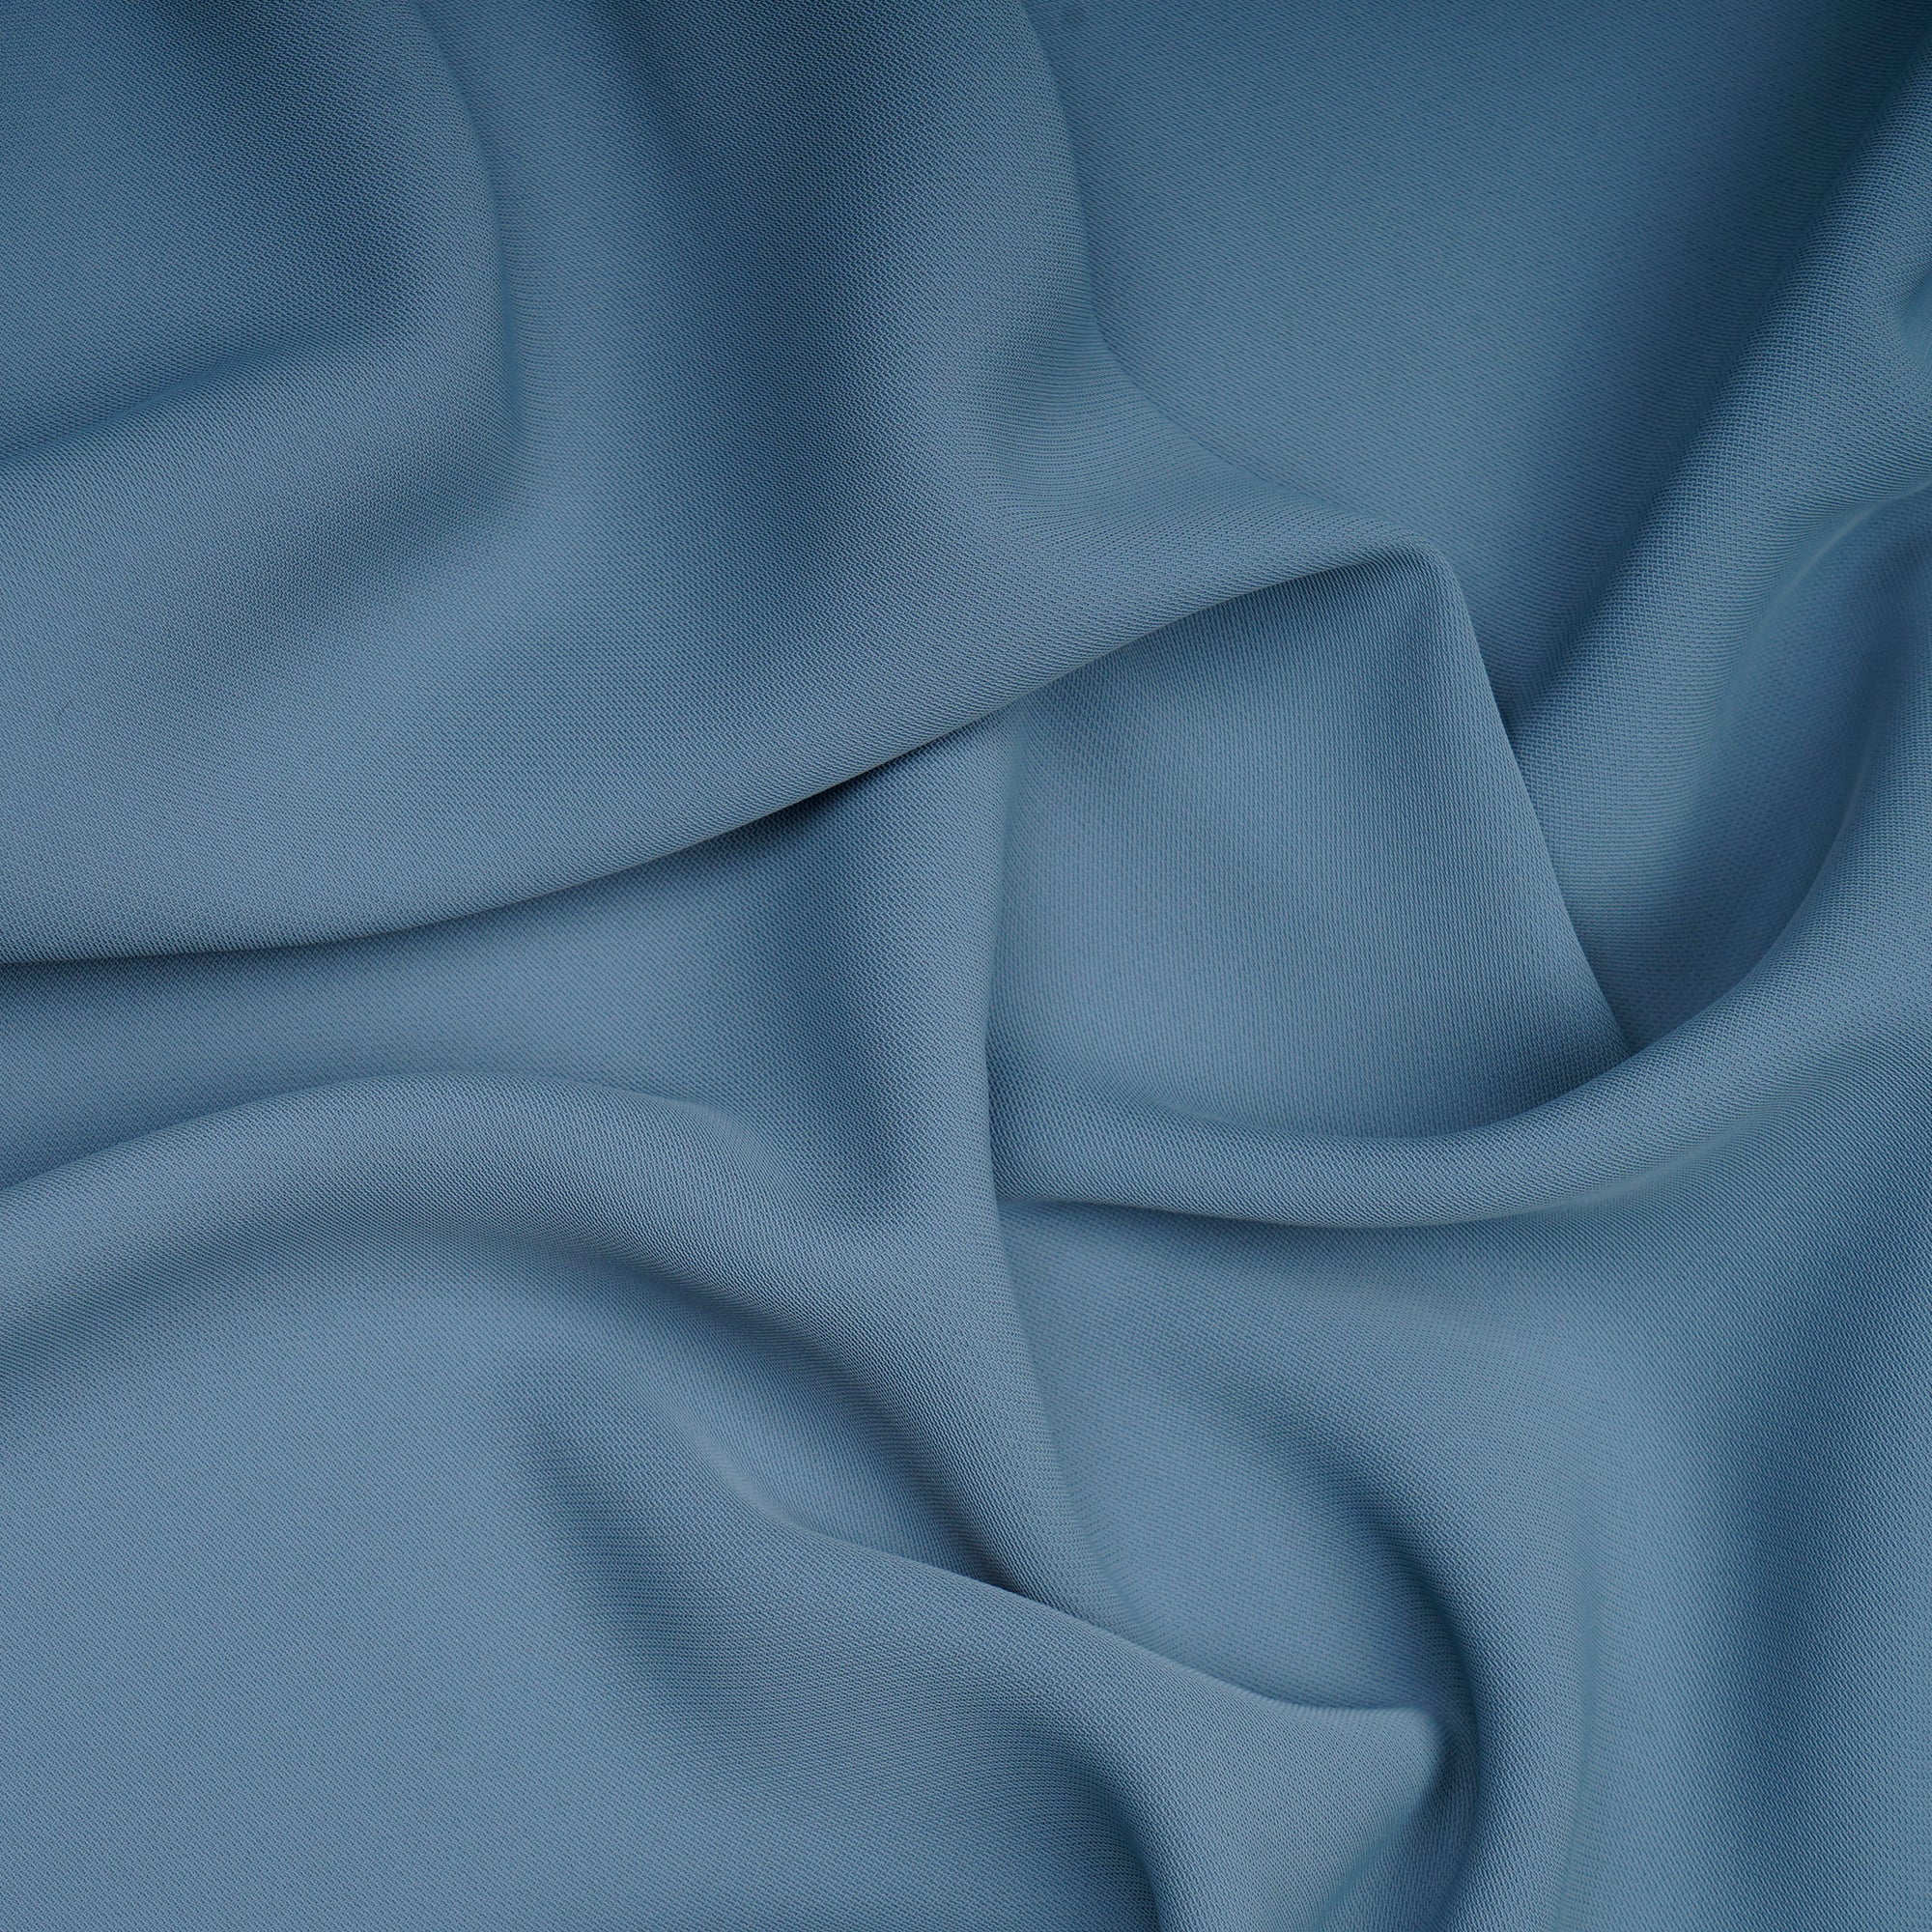 Adriatic Blue Solid Dyed Imported Mesh Twill Satin Fabric (60" Width)